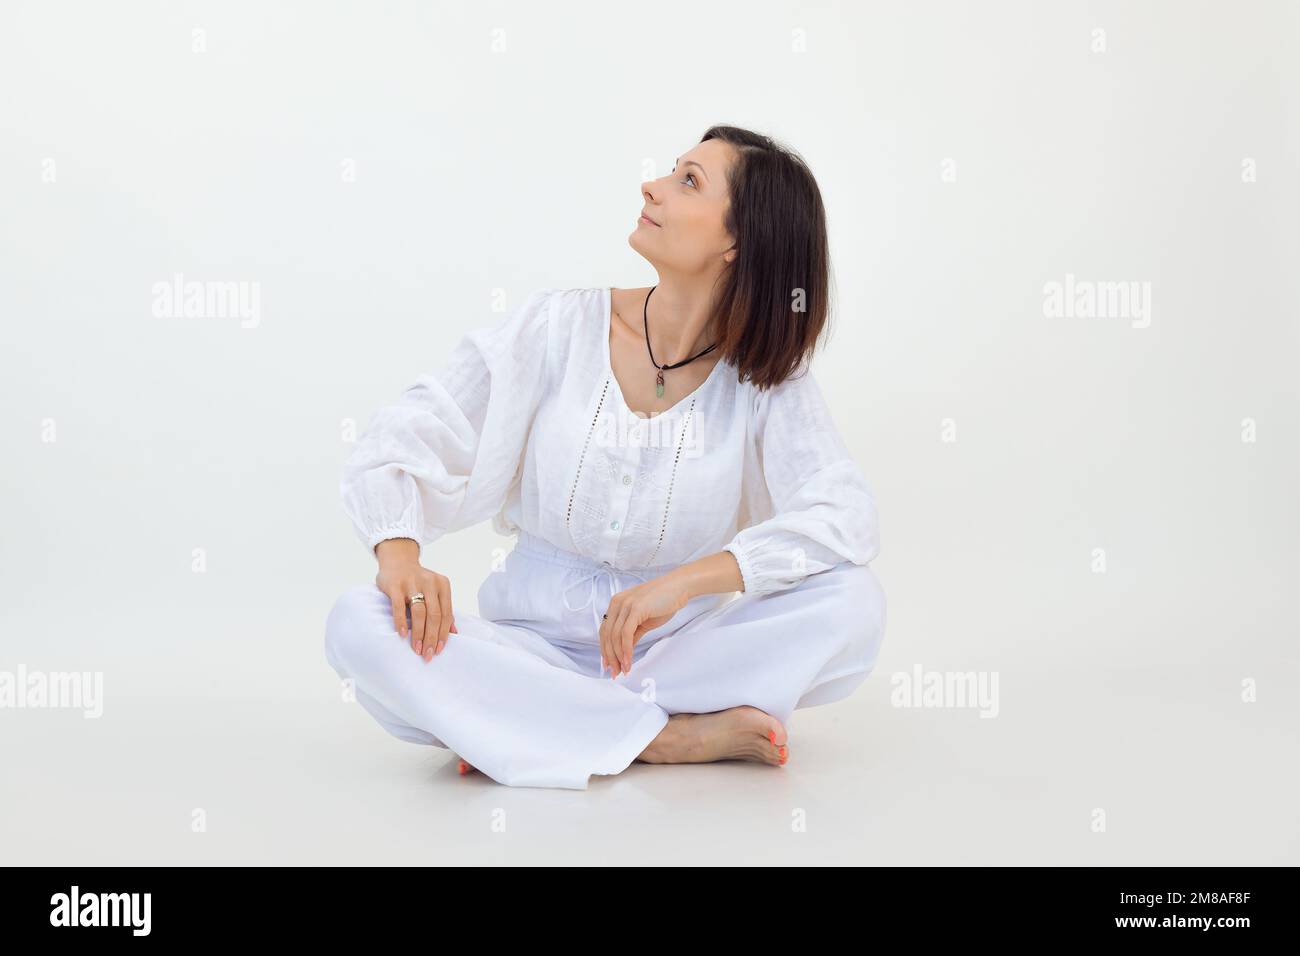 Young woman wearing white loose blouse, trousers, sitting on floor with crossed legs, looking up on white background. Stock Photo